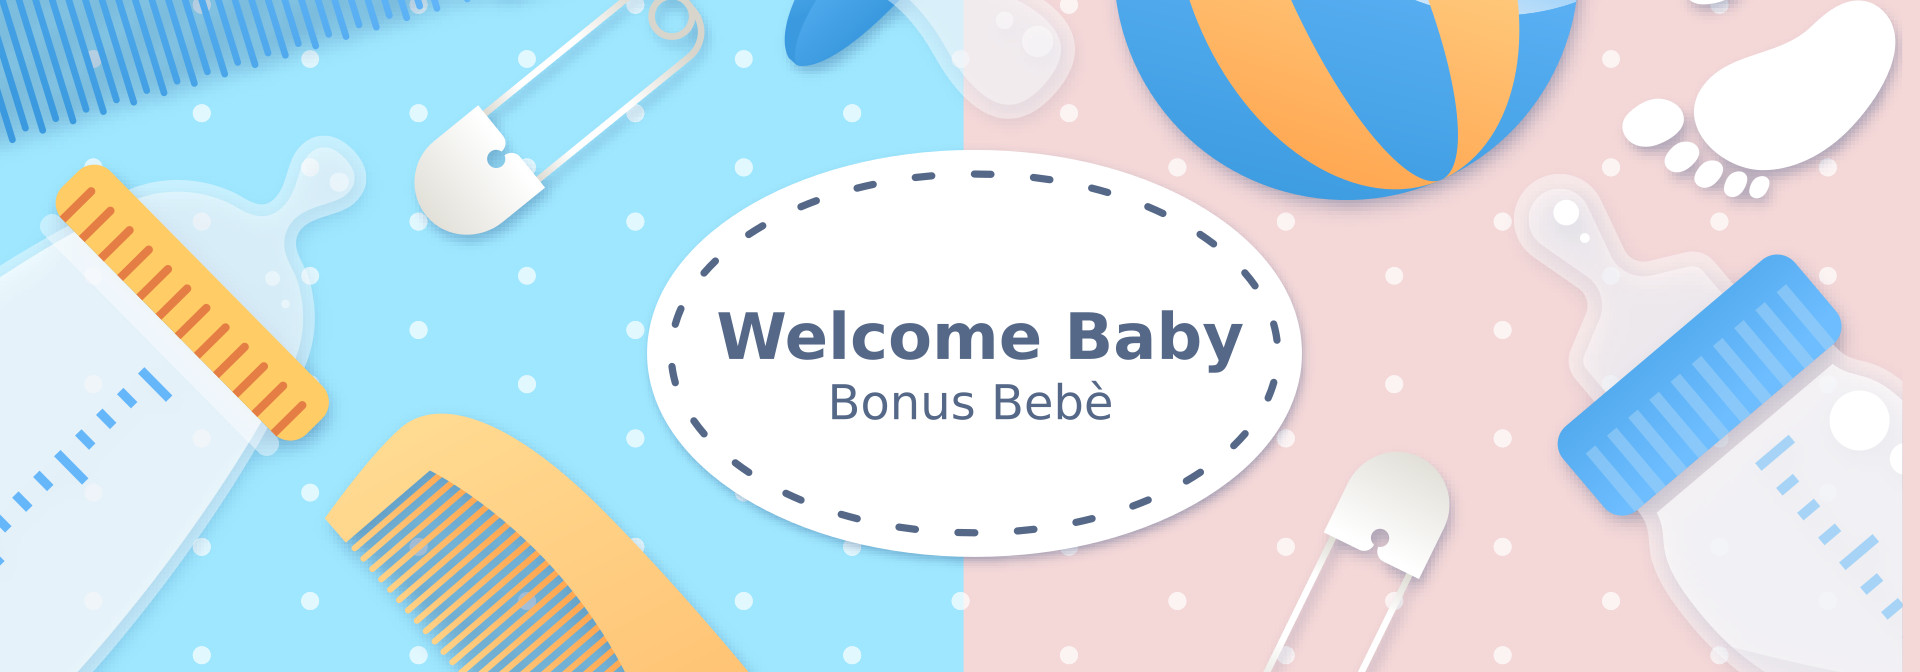 Banner - Welcome Baby